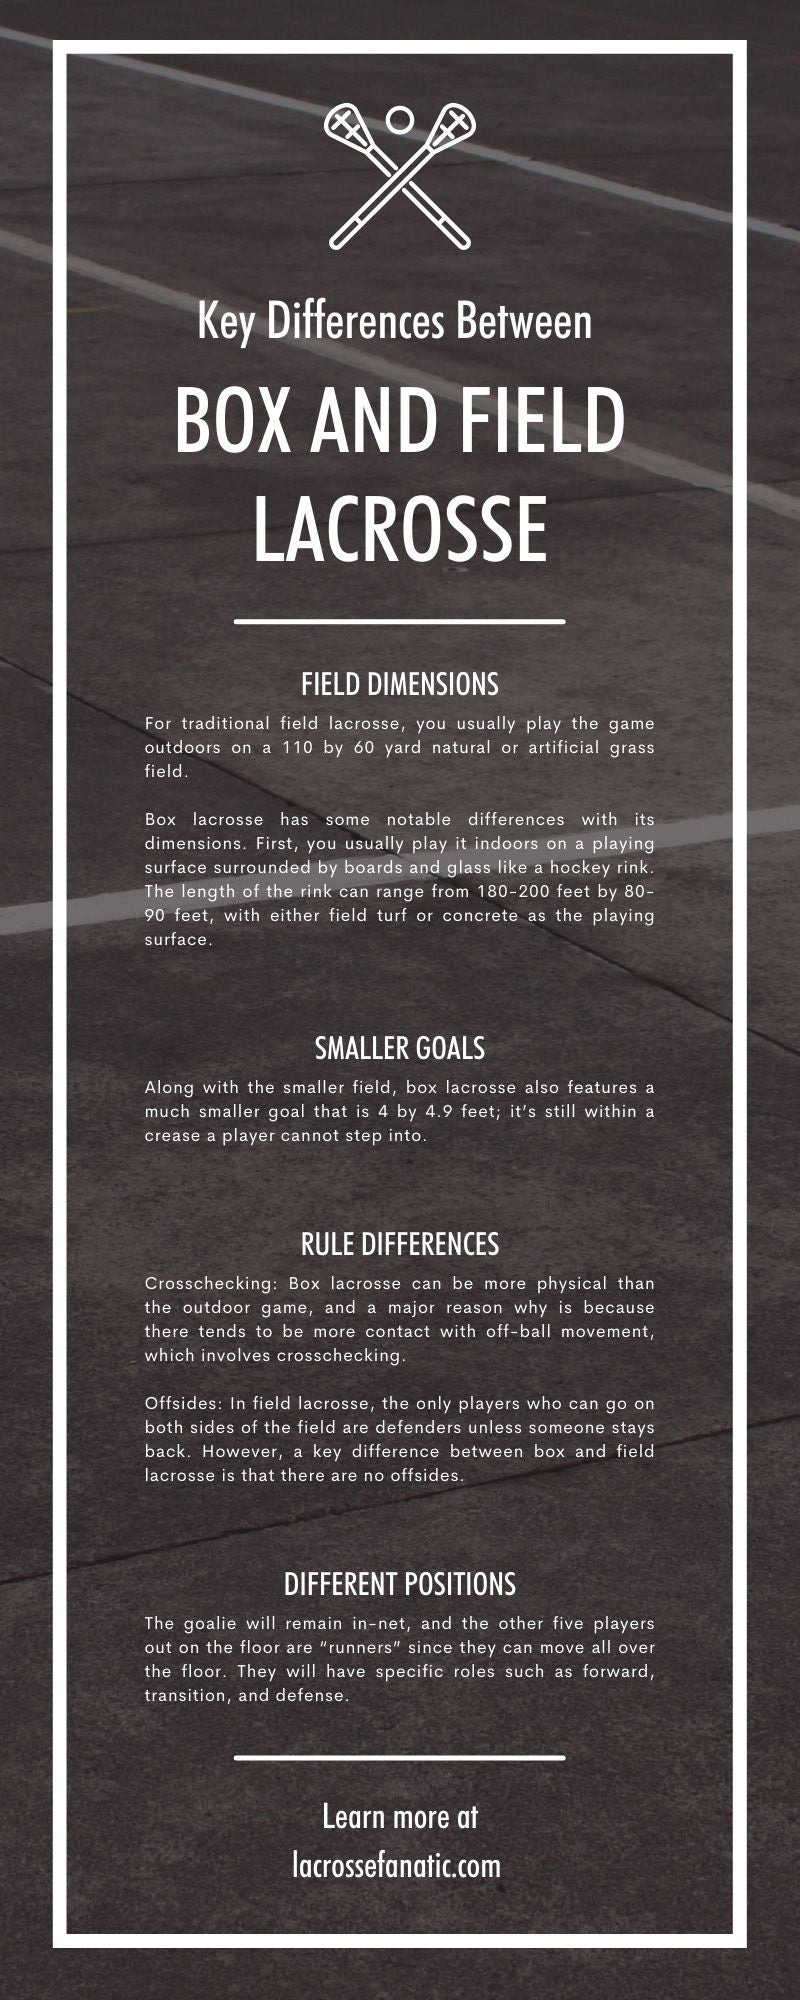 Key Differences Between Box and Field Lacrosse